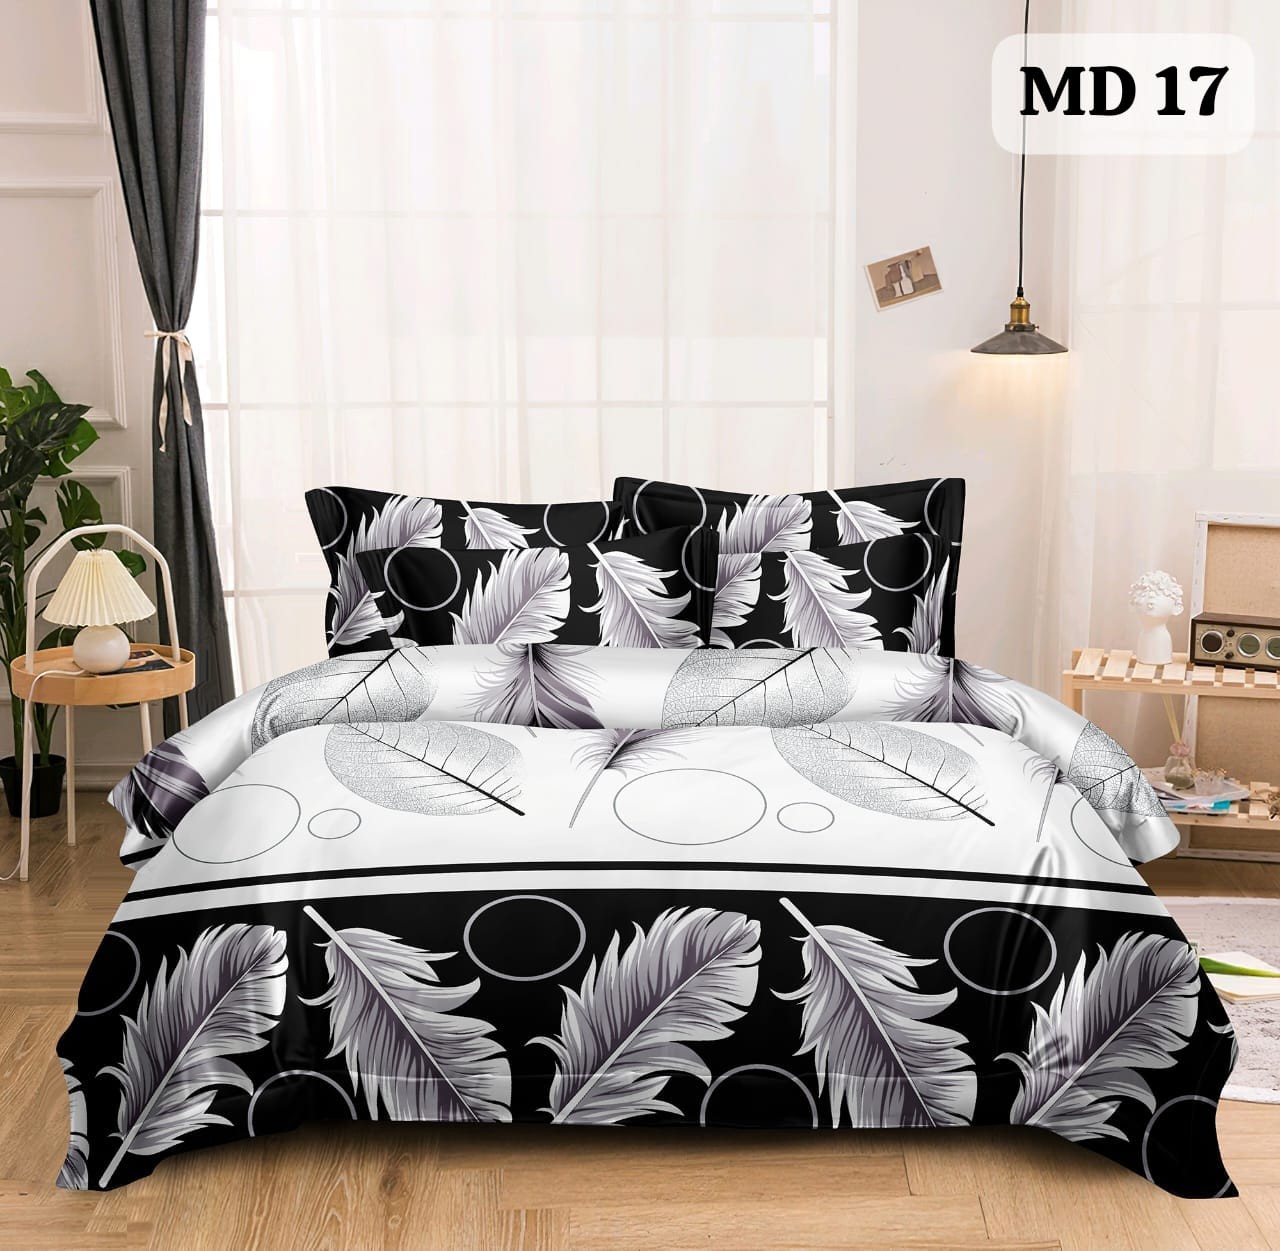 Leaves Design Bed Sheet - Twill Cotton Material